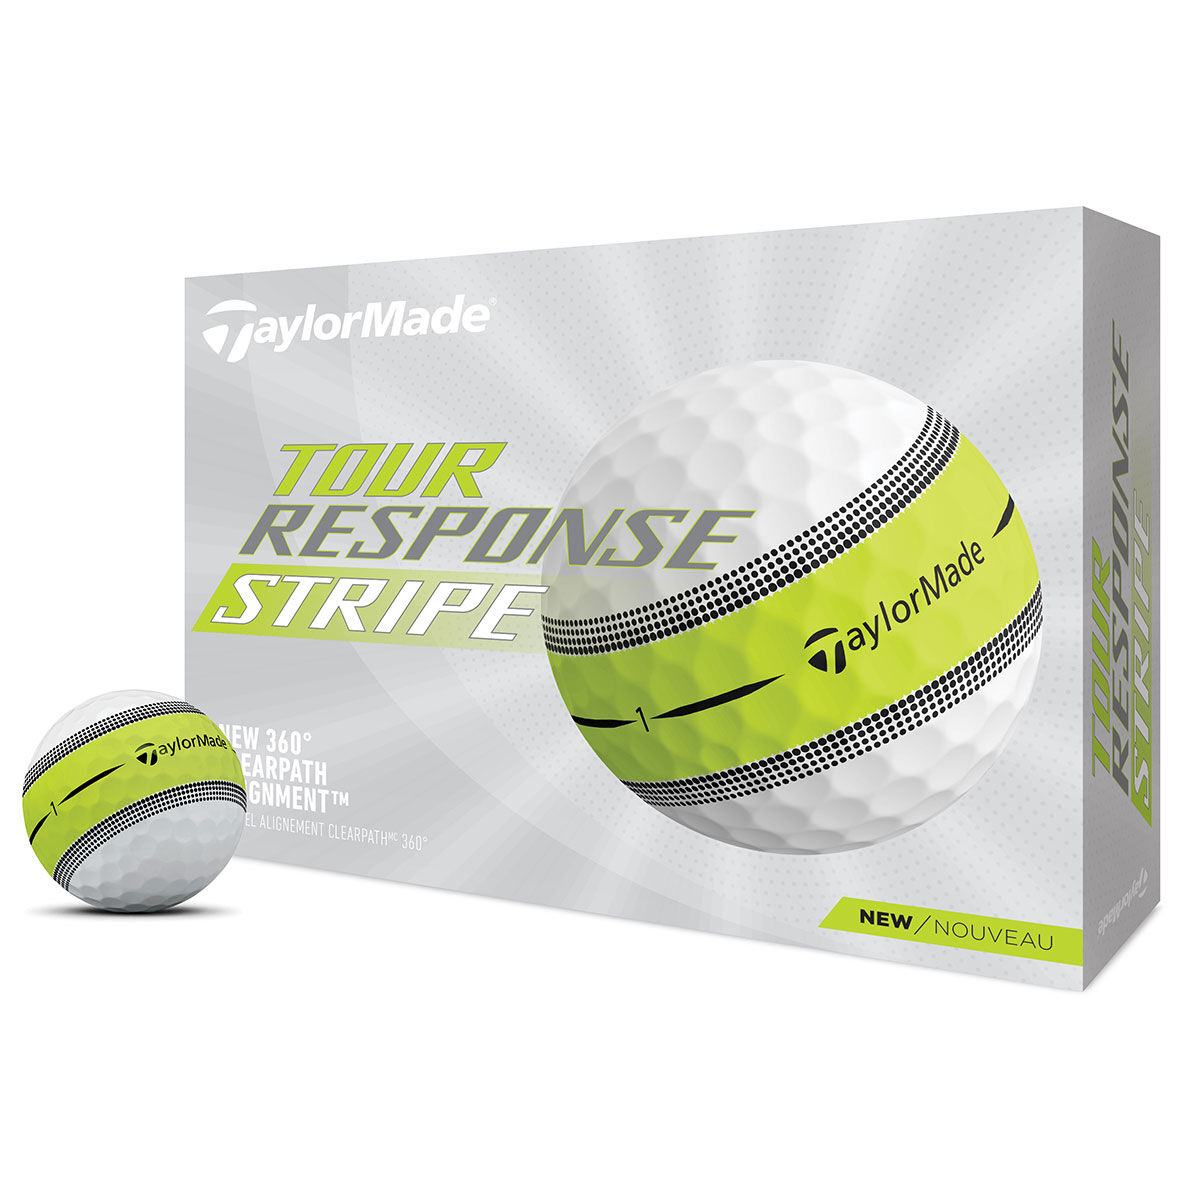 TaylorMade Golf Ball, Tour Response Stripe 12 Pack, White/green | American Golf, One Size